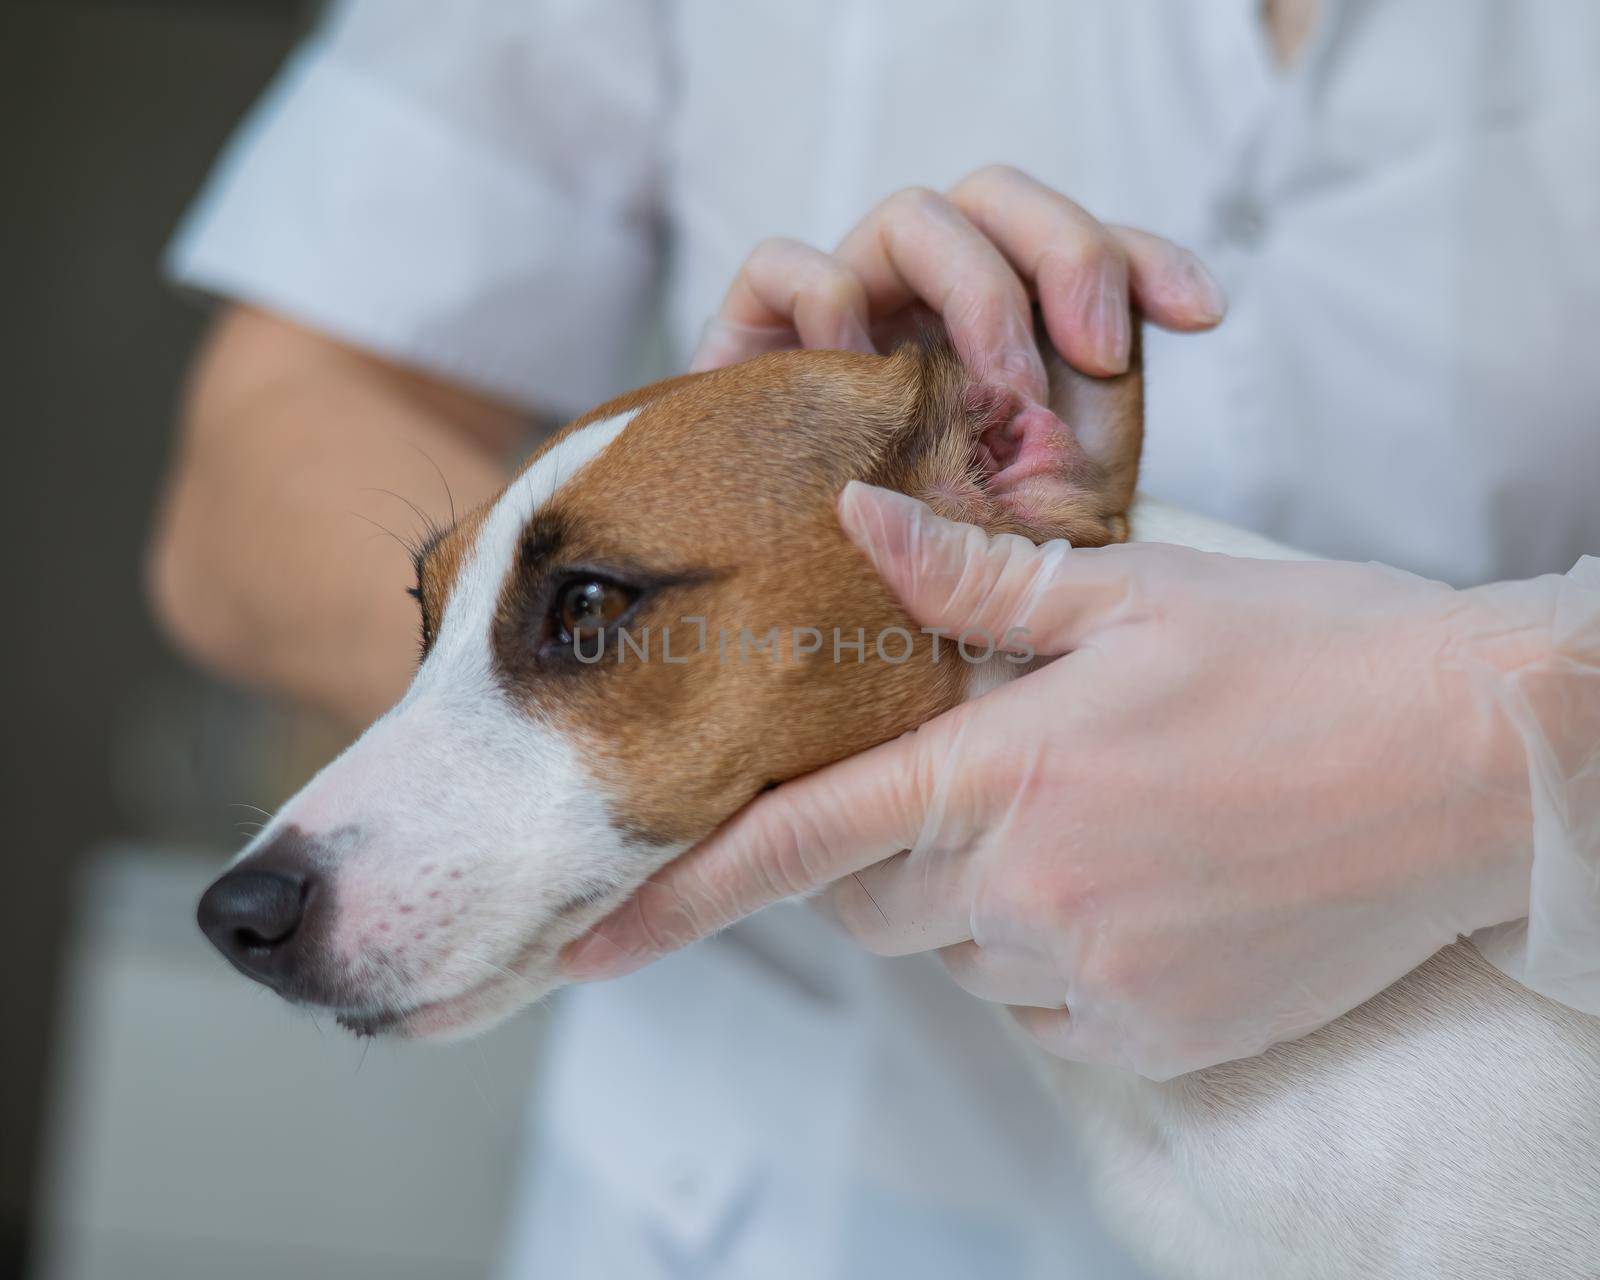 The veterinarian examines the dog's ears. Jack Russell Terrier Ear Allergy